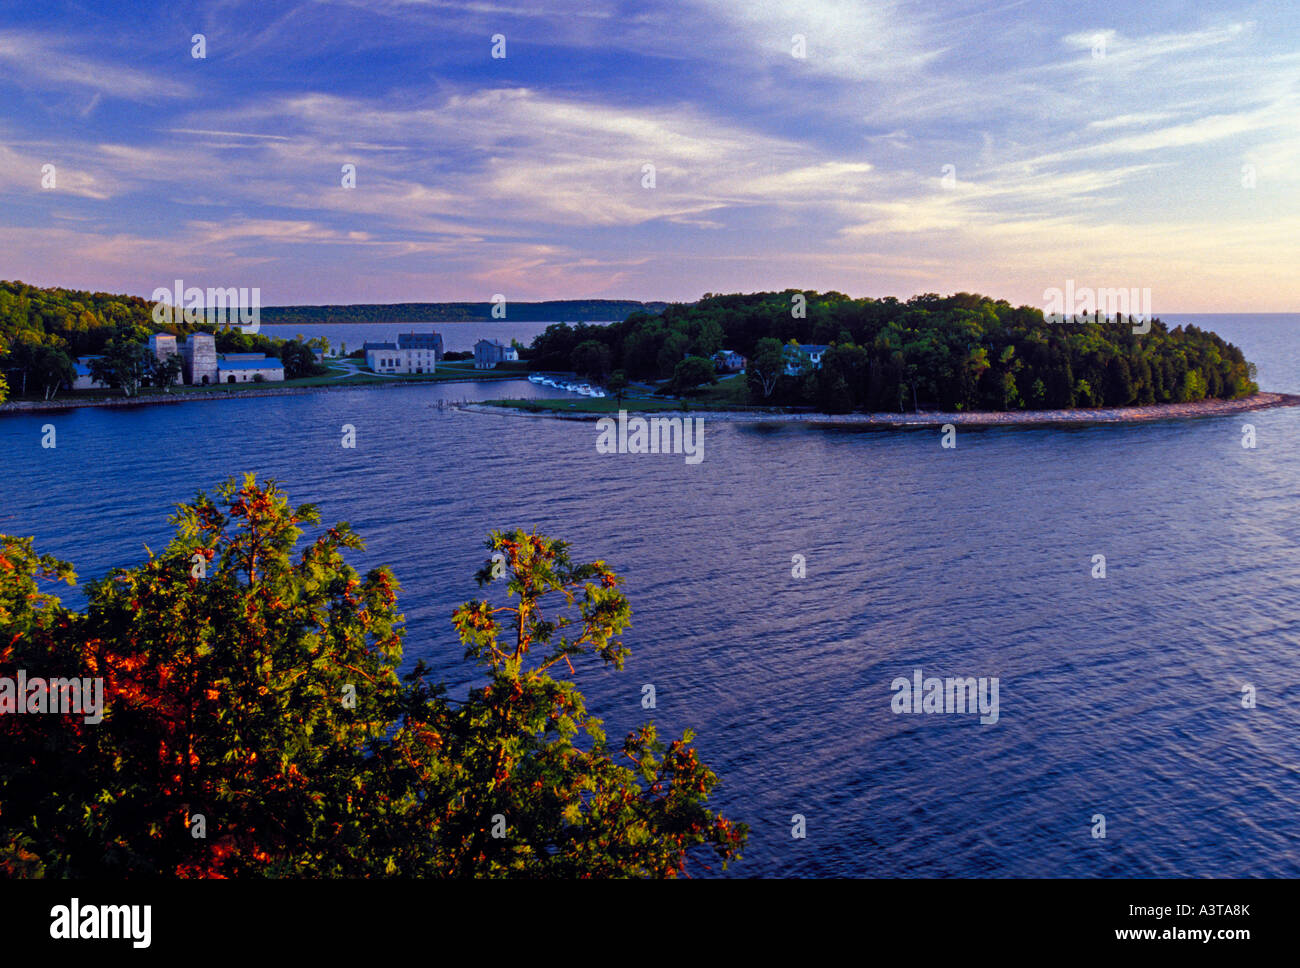 BUILDINGS AT FAYETTE STATE HISTORIC PARK ON THE GARDEN PENINSULA SEEN FROM A BLUFF ON SNAIL SHELL HARBOR Stock Photo